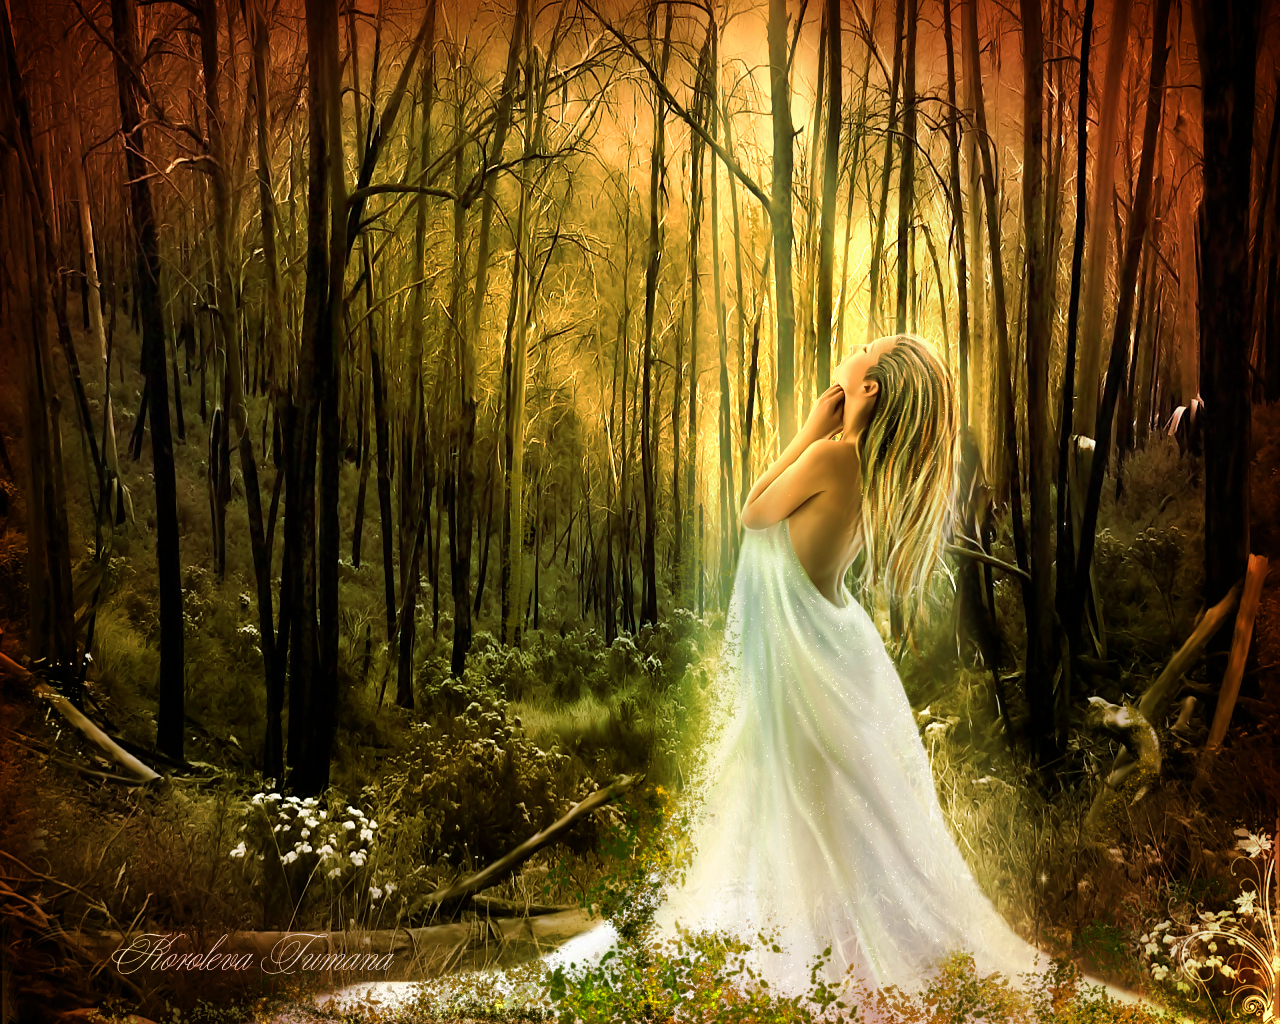 fairy forest wallpaper,people in nature,nature,photograph,forest,woodland